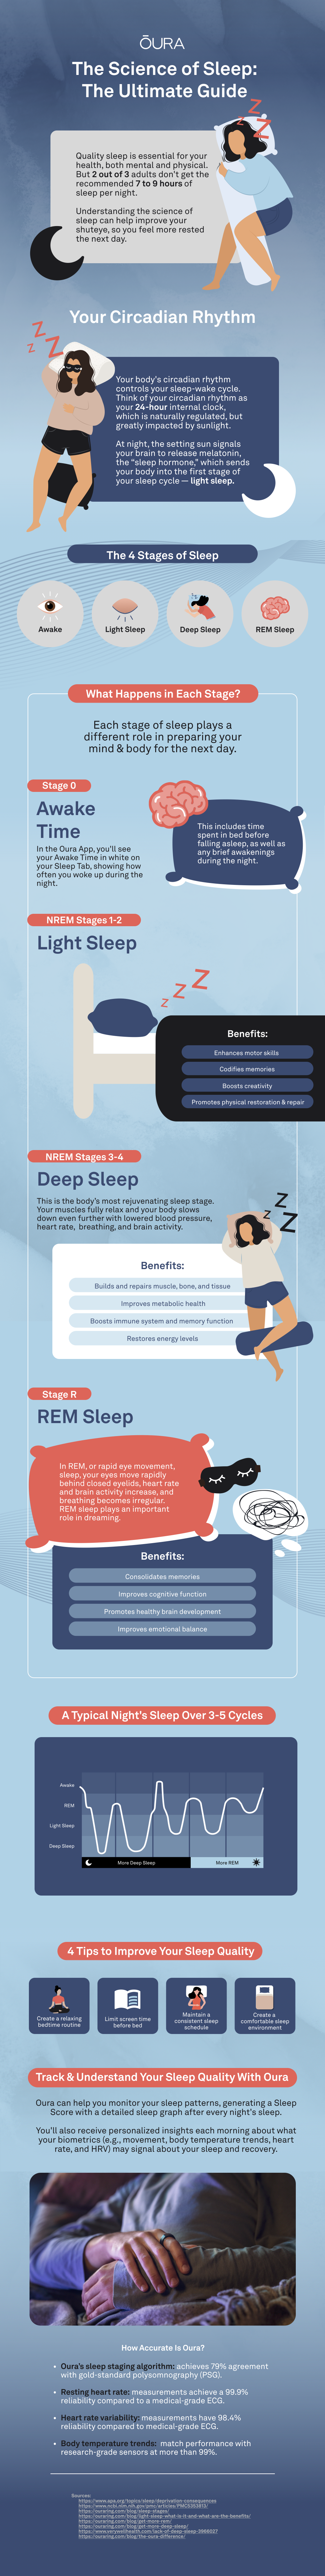 Infographic: The Science of Sleep | Oura Ring